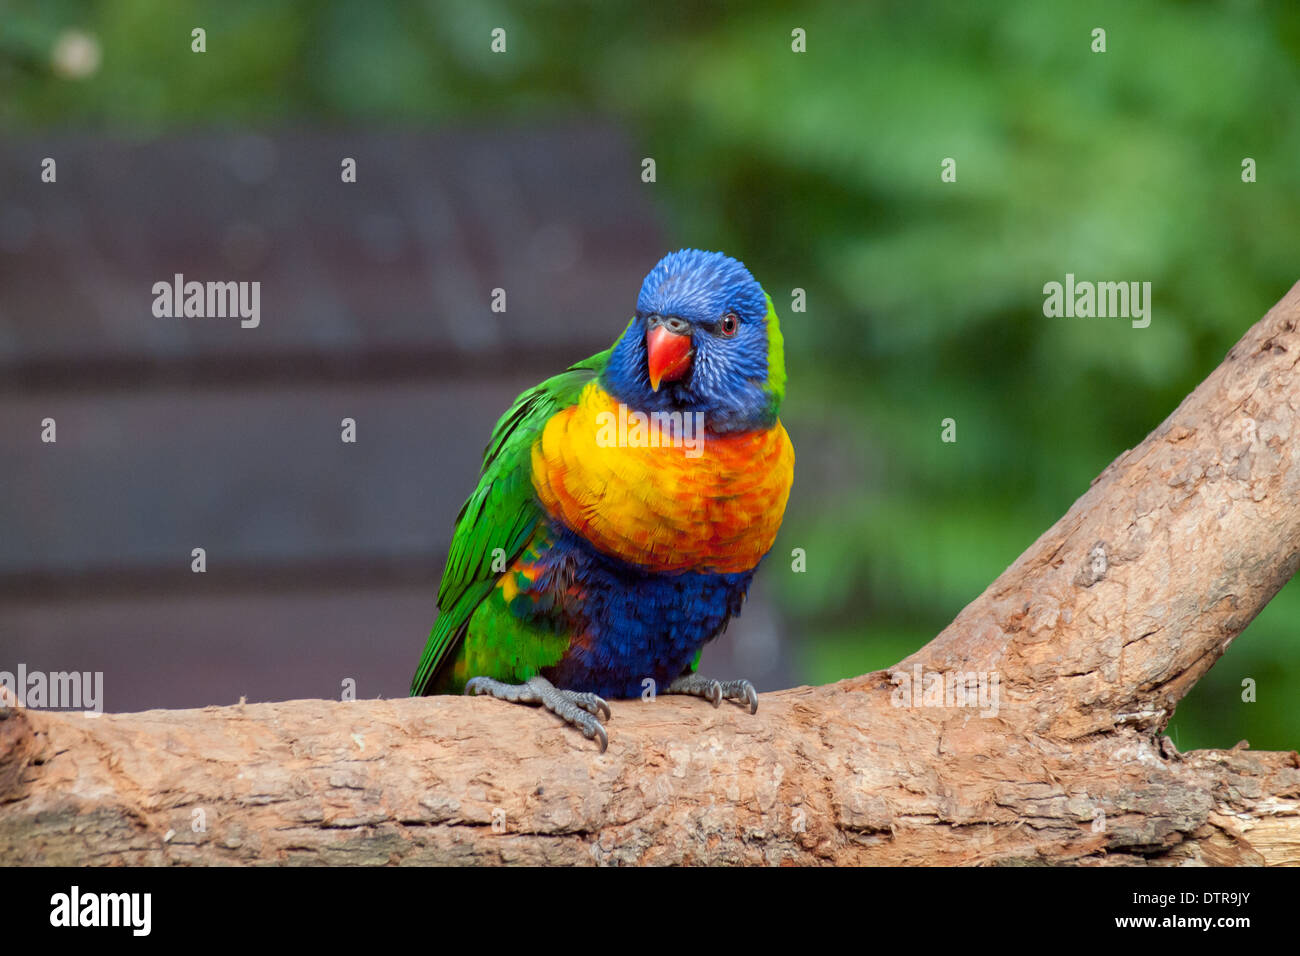 A gregarious Rainbow Lorikeet (Trichoglossus haematodus), a medium-sized parrot, perched on a tree branch in Sydney, Australia. Stock Photo